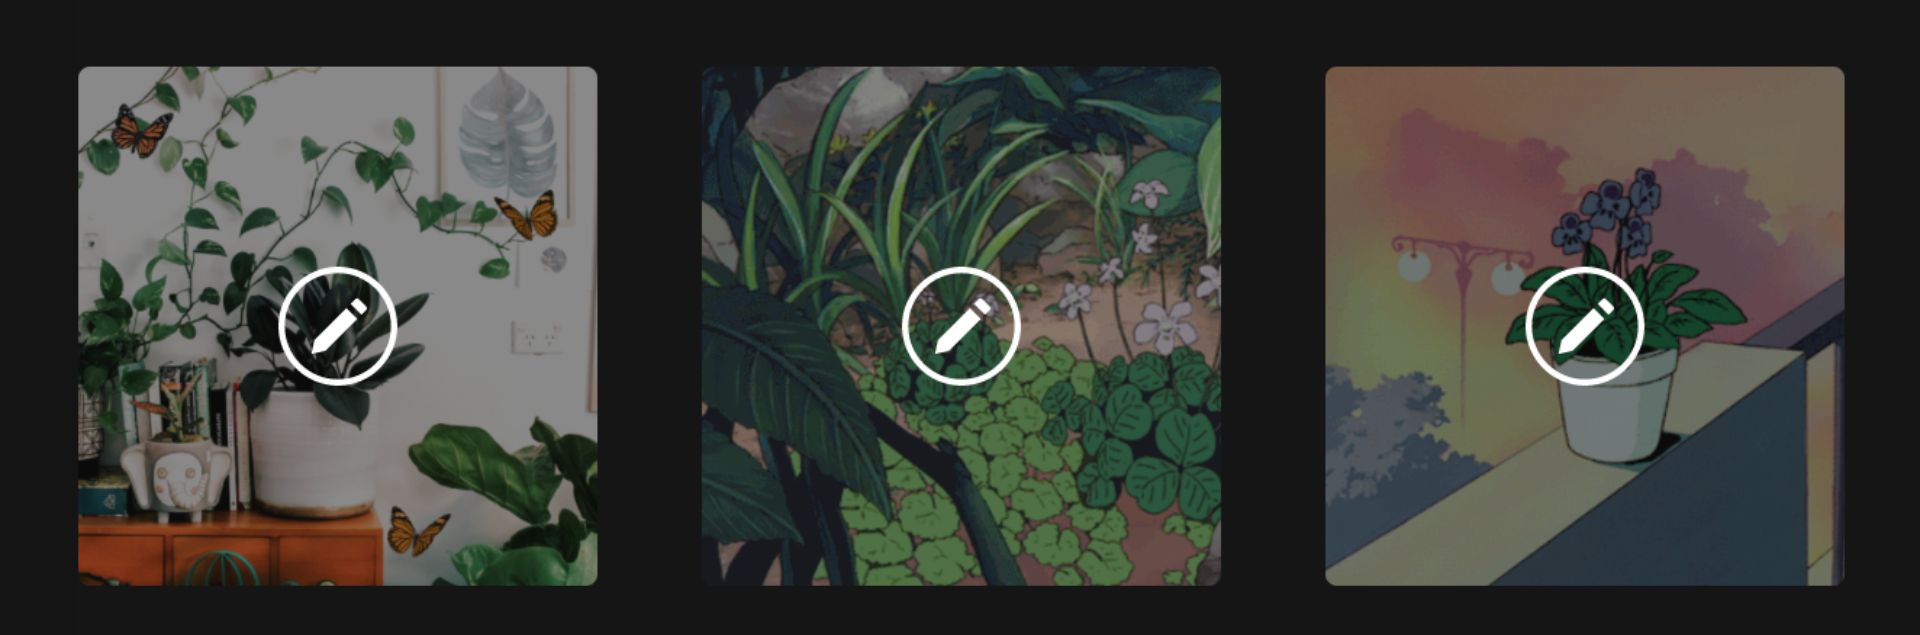 screenshot of three profile pictures with plants on a Netflix account